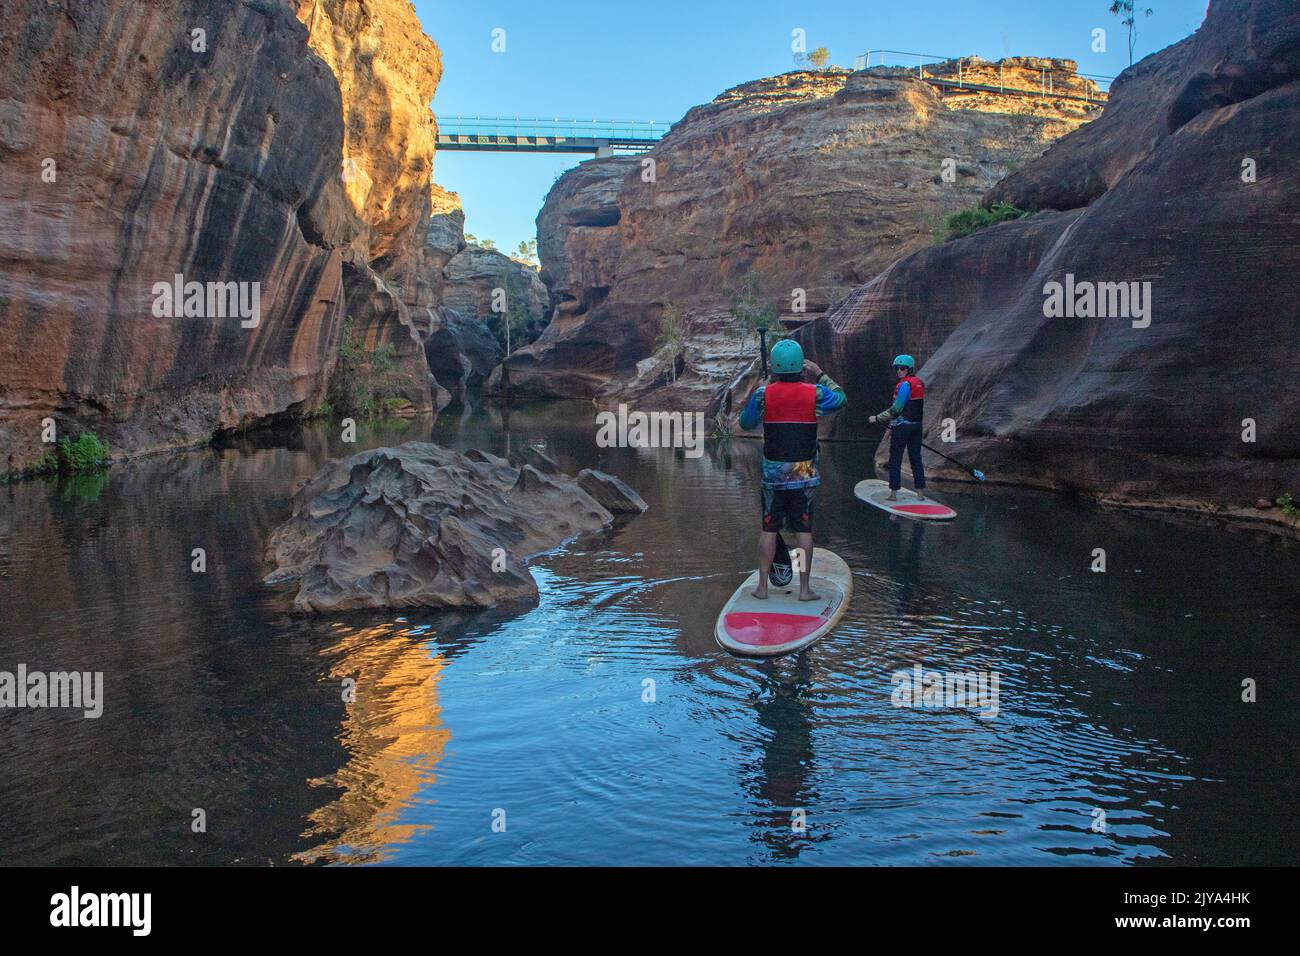 Stand-up paddleboarding in Cobbold Gorge Stock Photo